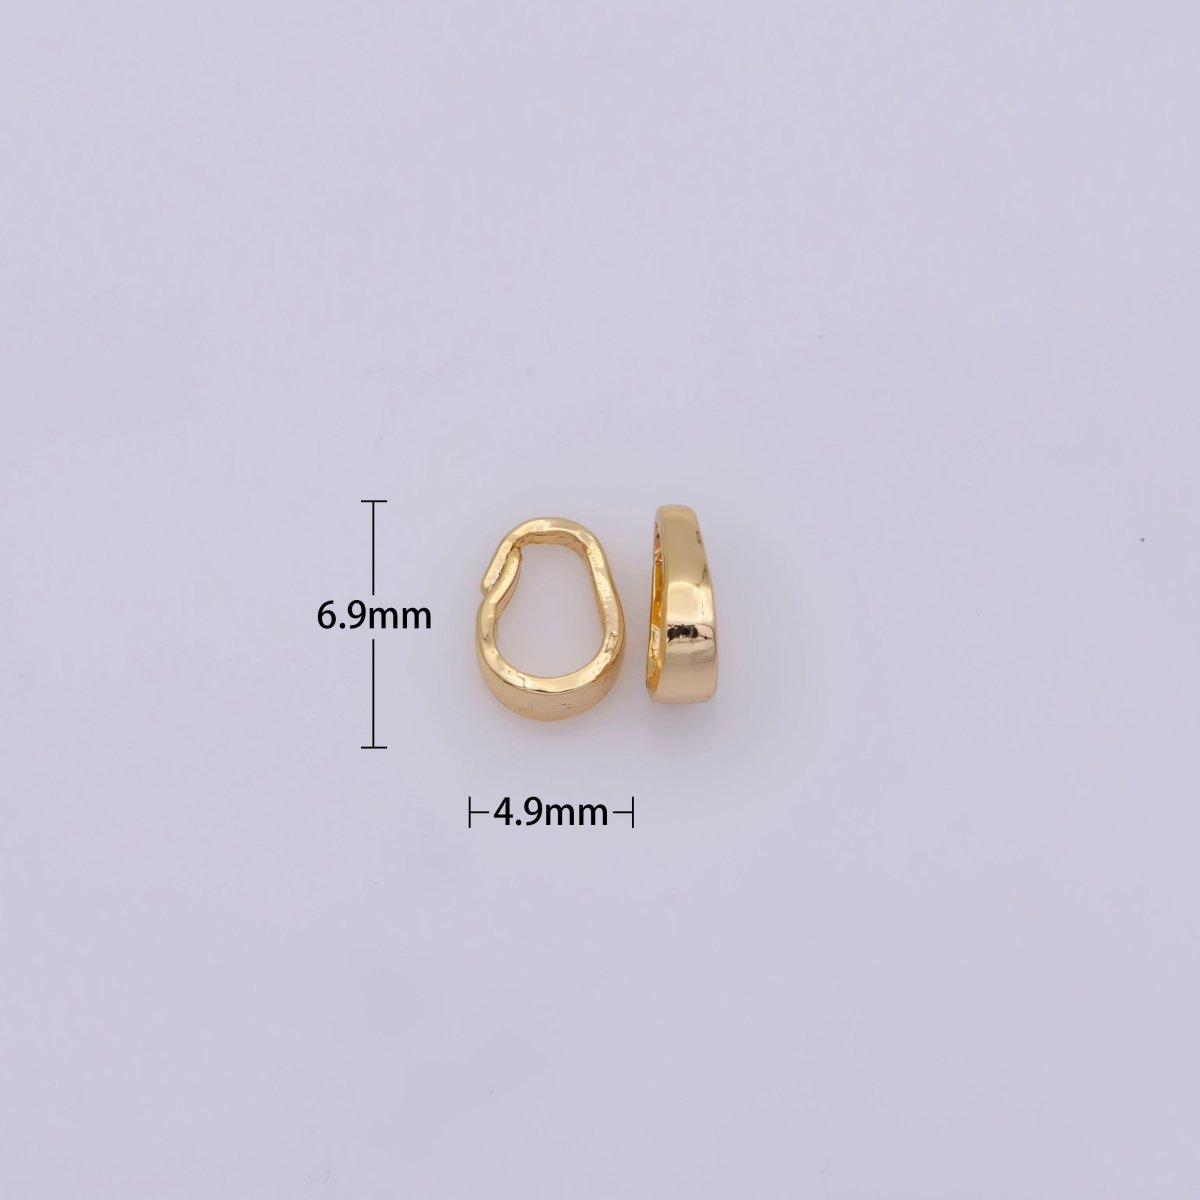 1x Gold Filled bail snap-on for pendant and charm. Perfect for Necklace Anklet Bracelet Jewelry Making wholesale Finding Component - DLUXCA